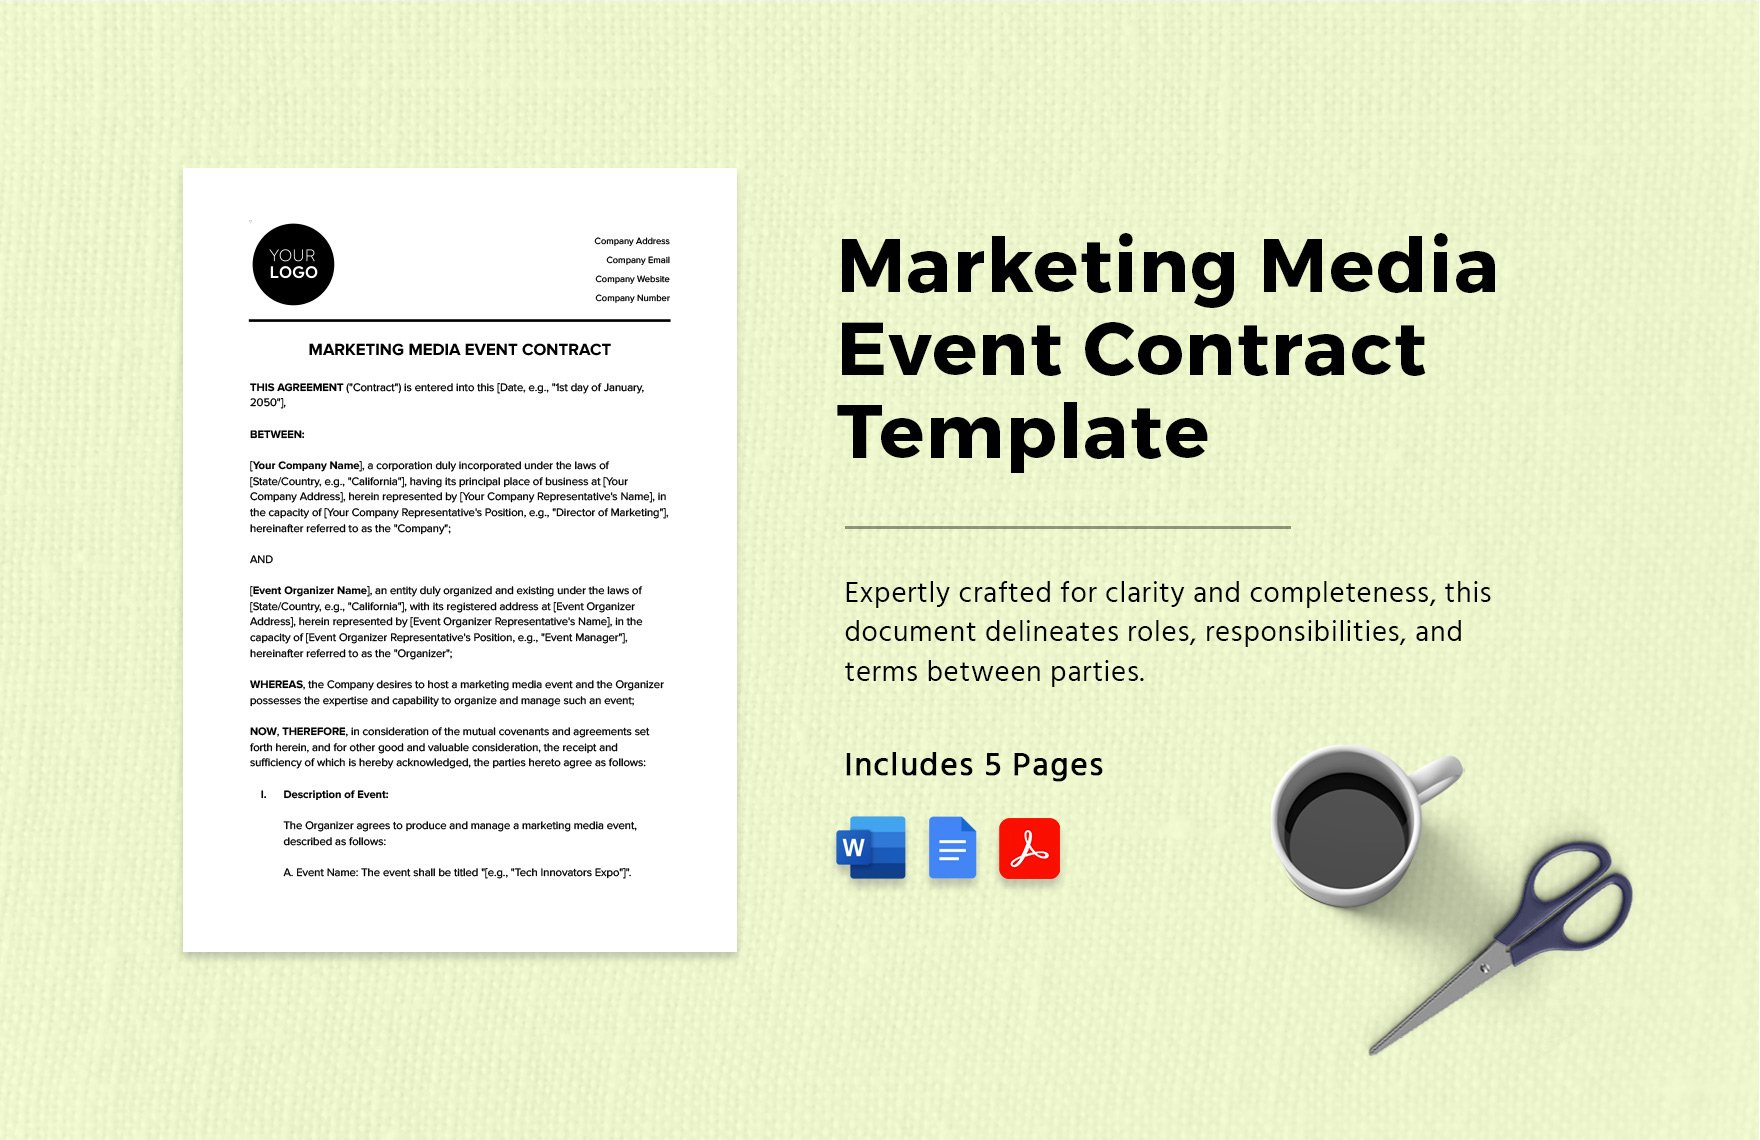 Marketing Media Event Contract Template